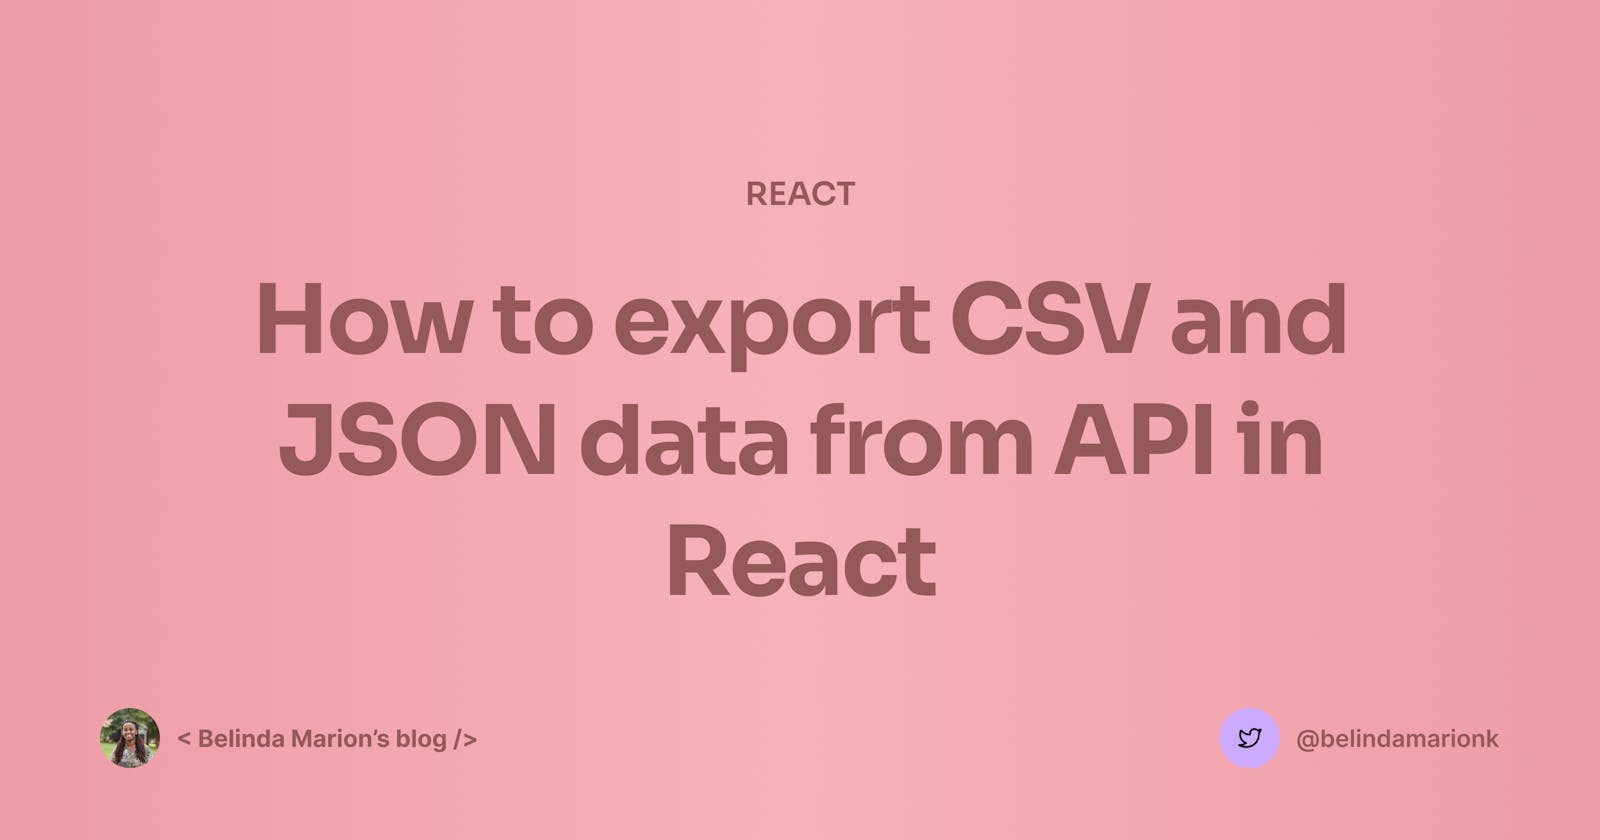 How to export CSV and JSON data from API in React